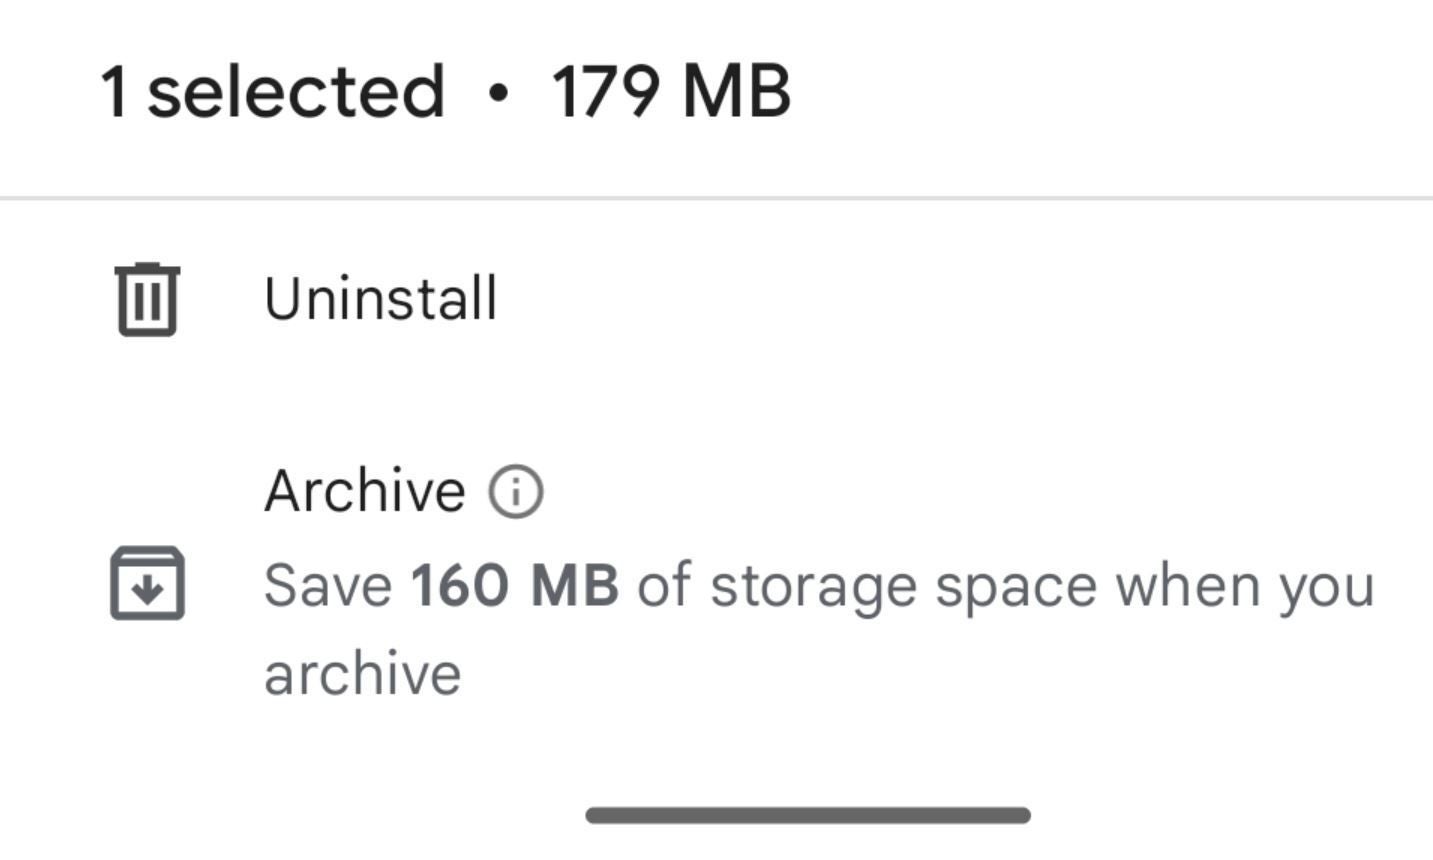 You will be able to Archive instead of Uninstall from within your Apps menu in Settings. - New useful features to hit the Google Play store app soon